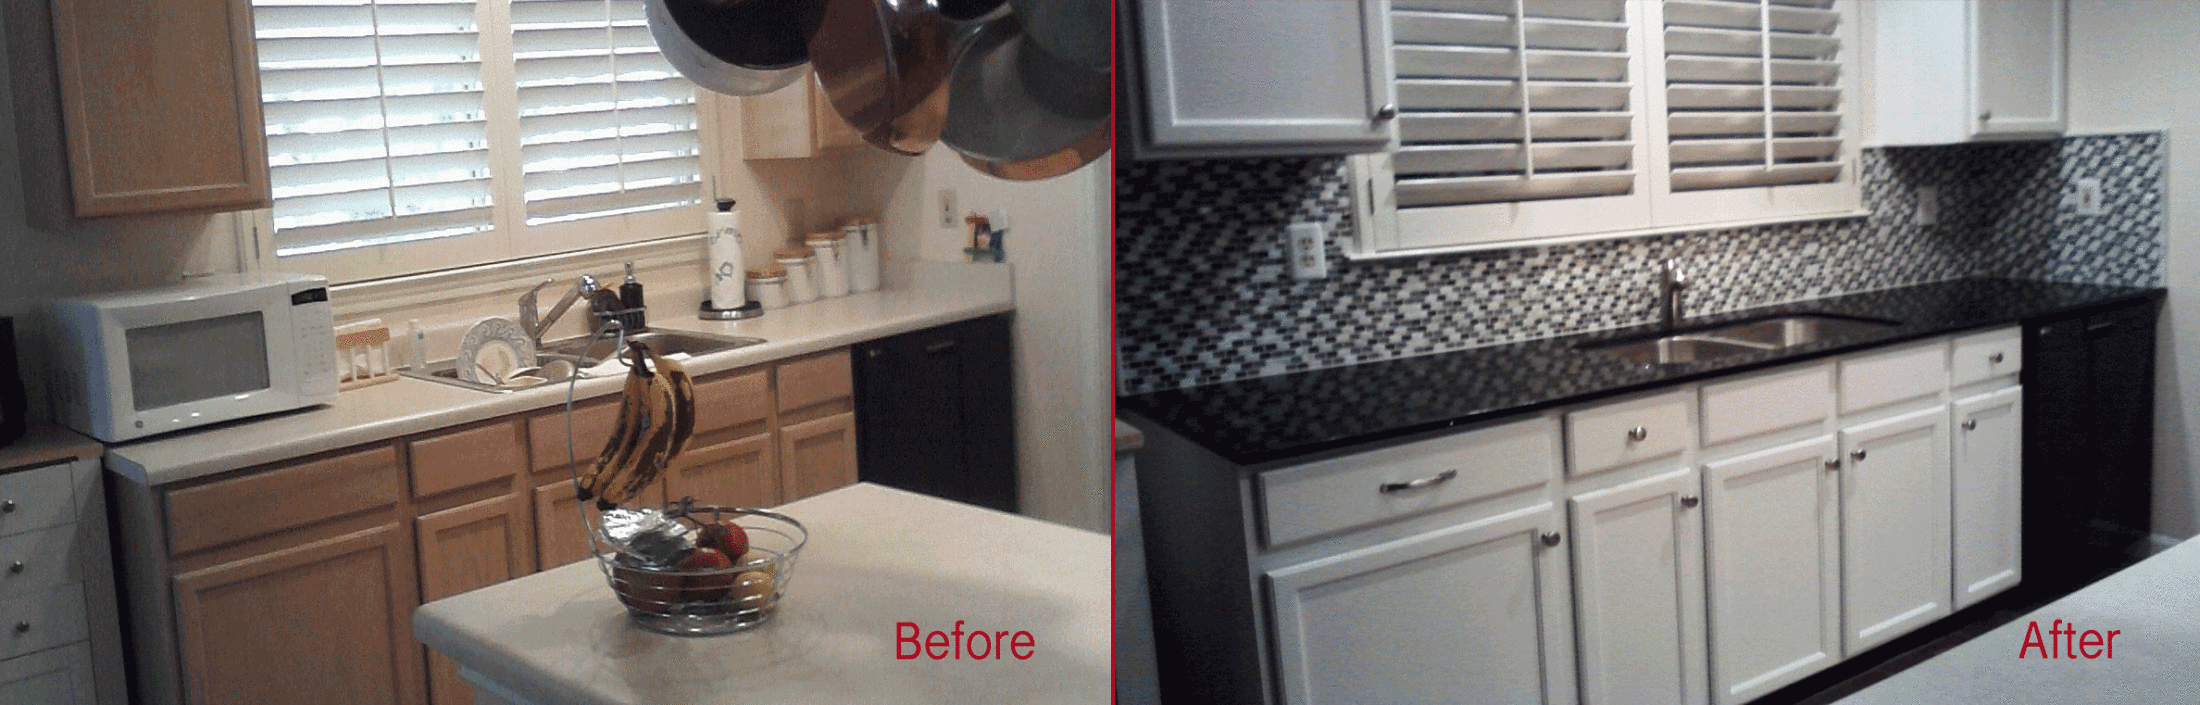 Kitchen Remodel Done Right. Backsplash design, Marble Counters, Cabinets Painted to Last